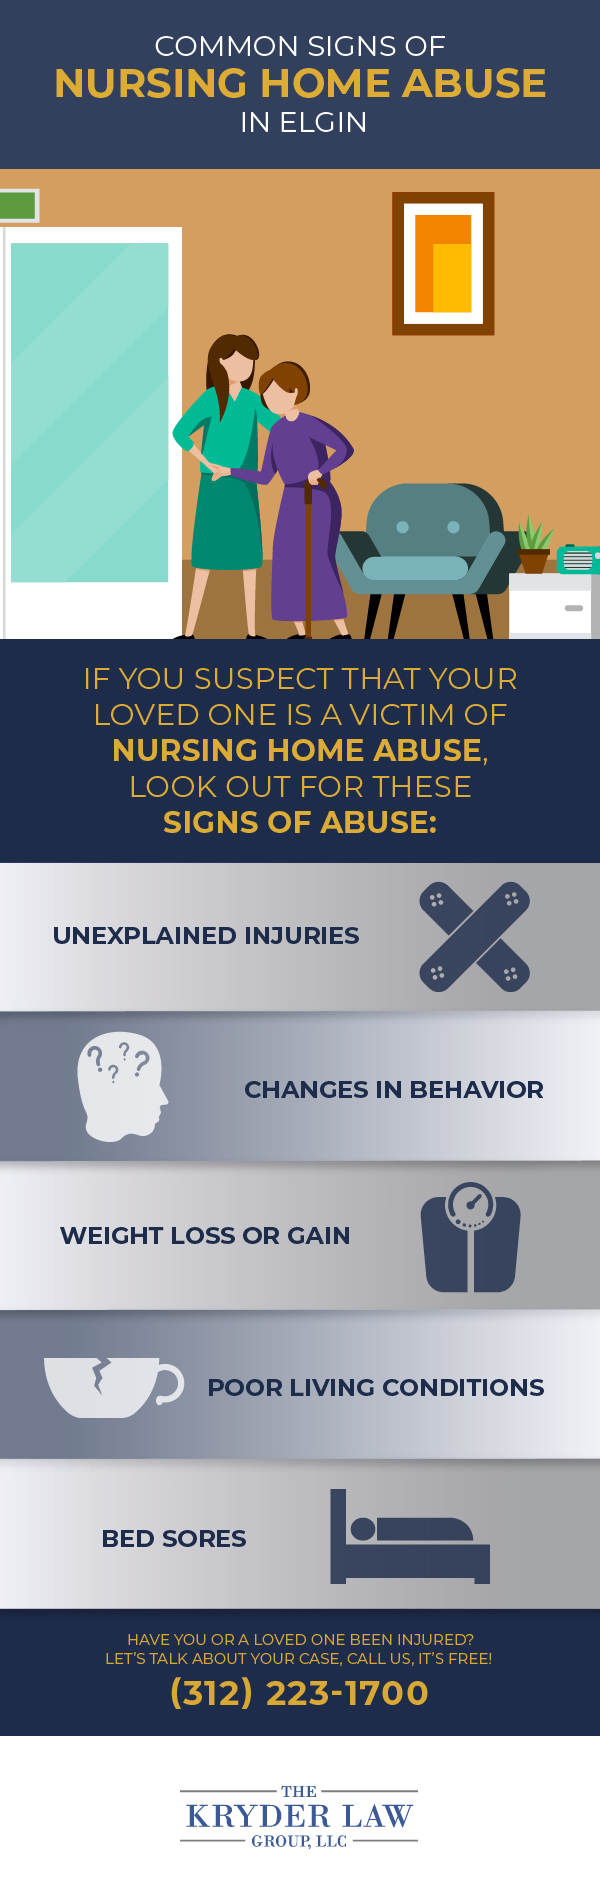 Common signs of Nursing Home Abuse in Elgin